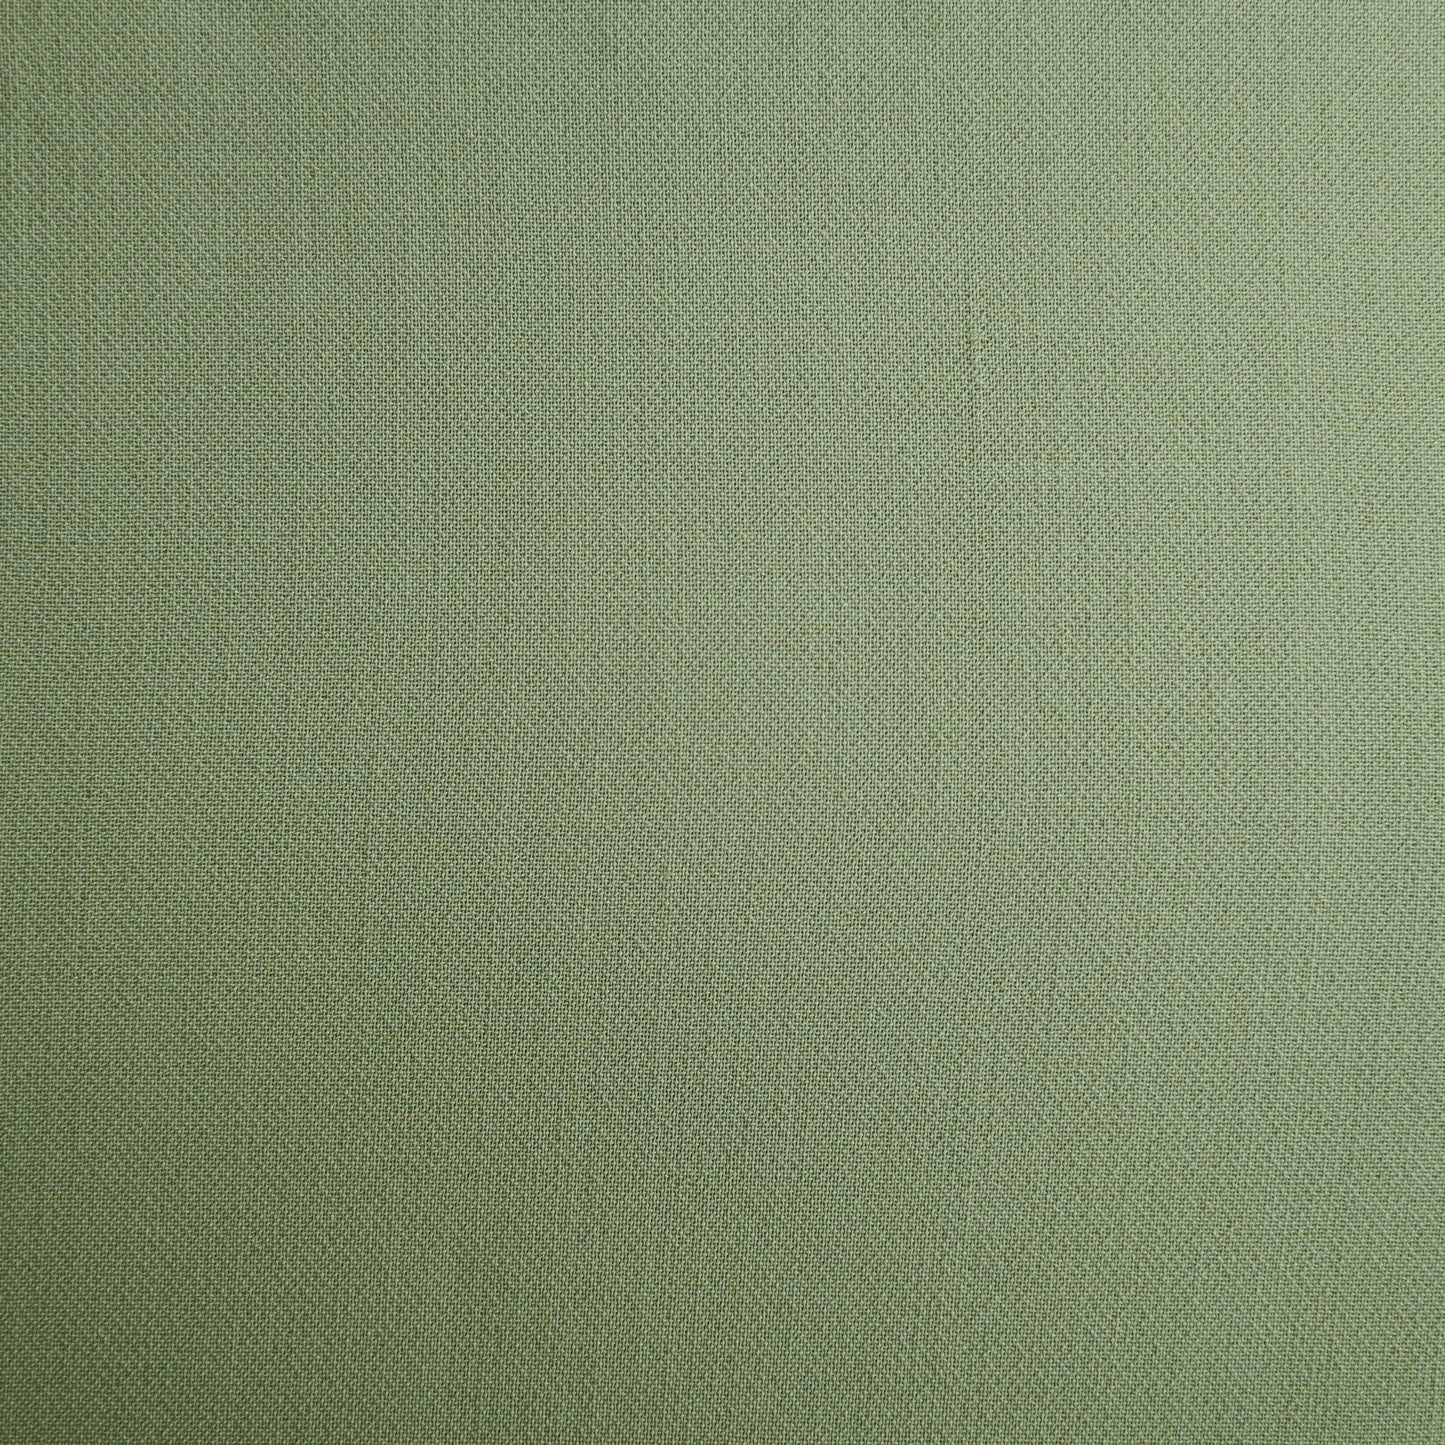 Mid-weight Viscose Spandex blend fabric in Sage. Blended with Spandex (elastane), this fabric does not limit movements when made into garments. 